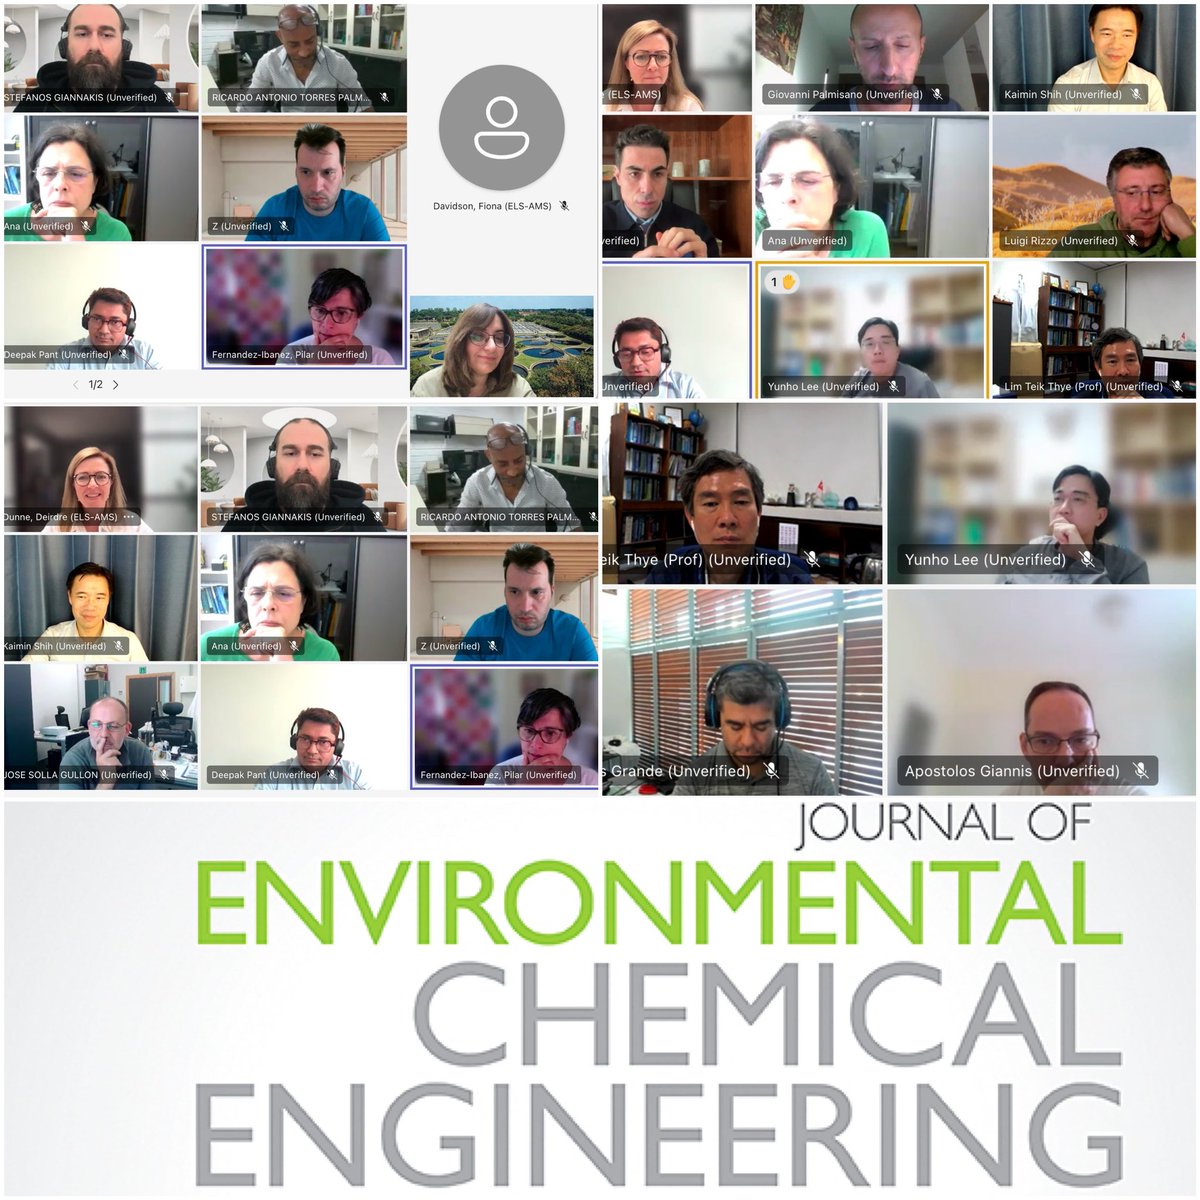 Reflective and forward-thinking discussions on ethical issues, workflow enhancements, and new initiatives took center stage at our editors meeting for the Journal of Environmental Chemical Engineering today @JEnvironChemEng @EnvSciHealth @Elsevier_Eng